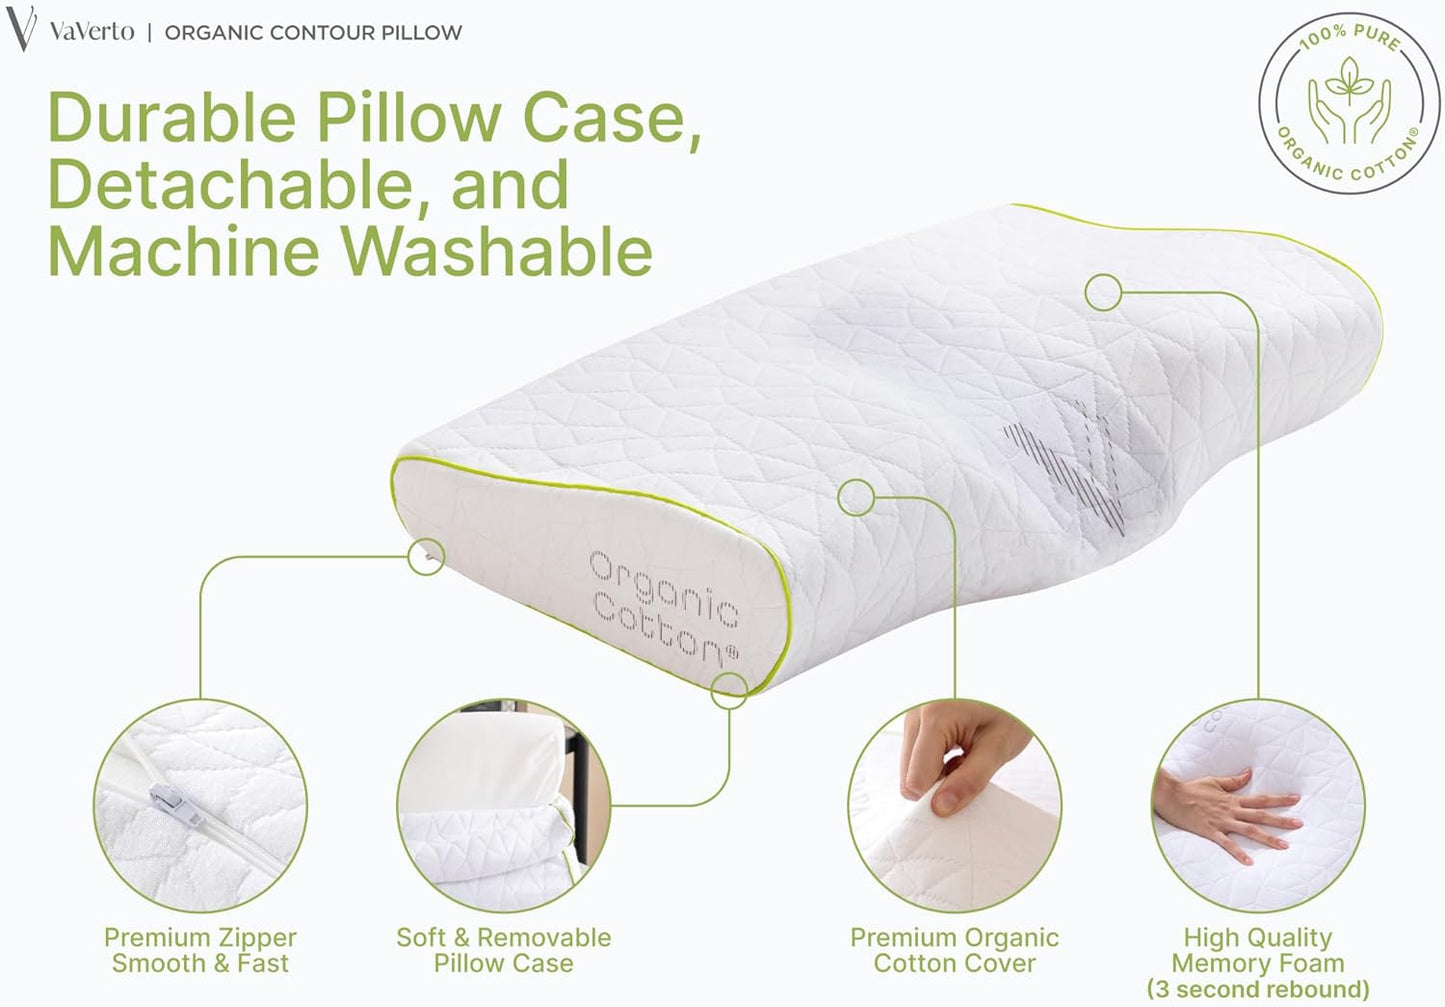 New Adjustable Contour Memory Foam Pillow - Standard Size - Orthopedic Neck Support, Pain Relief, Washable, Organic Cotton Cover Ergonomic Cervical - Ideal for Side, Back & Stomach Sleepers…